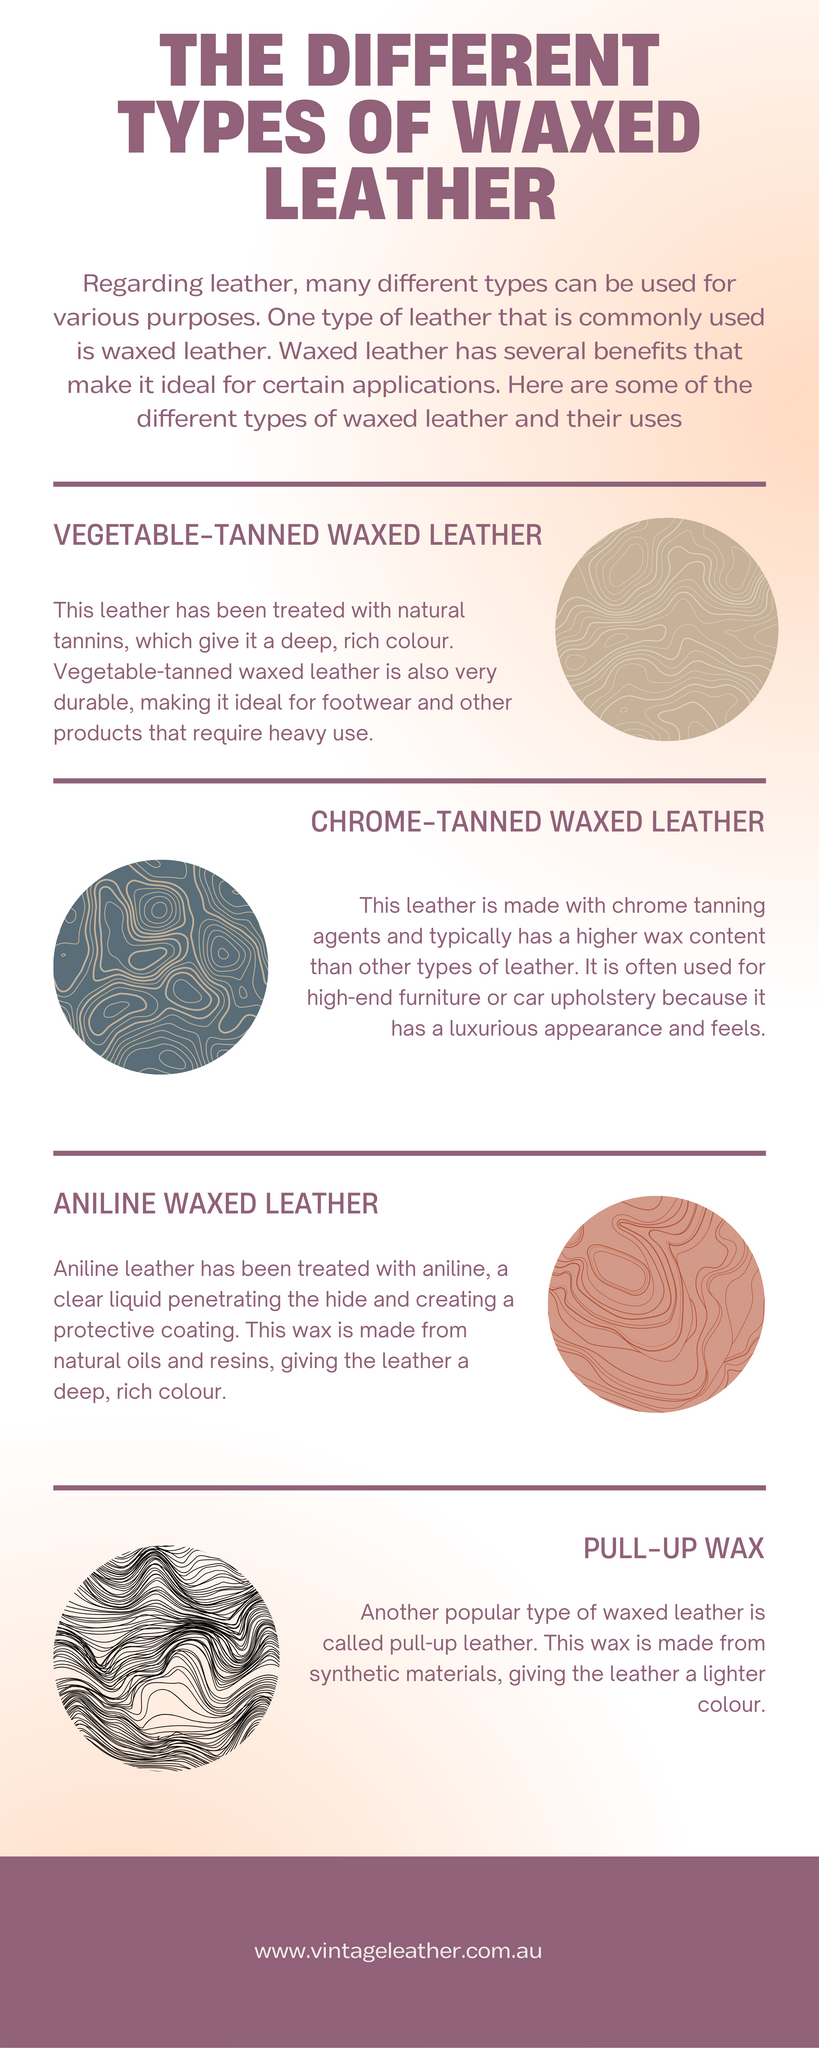 The different types of waxed leather